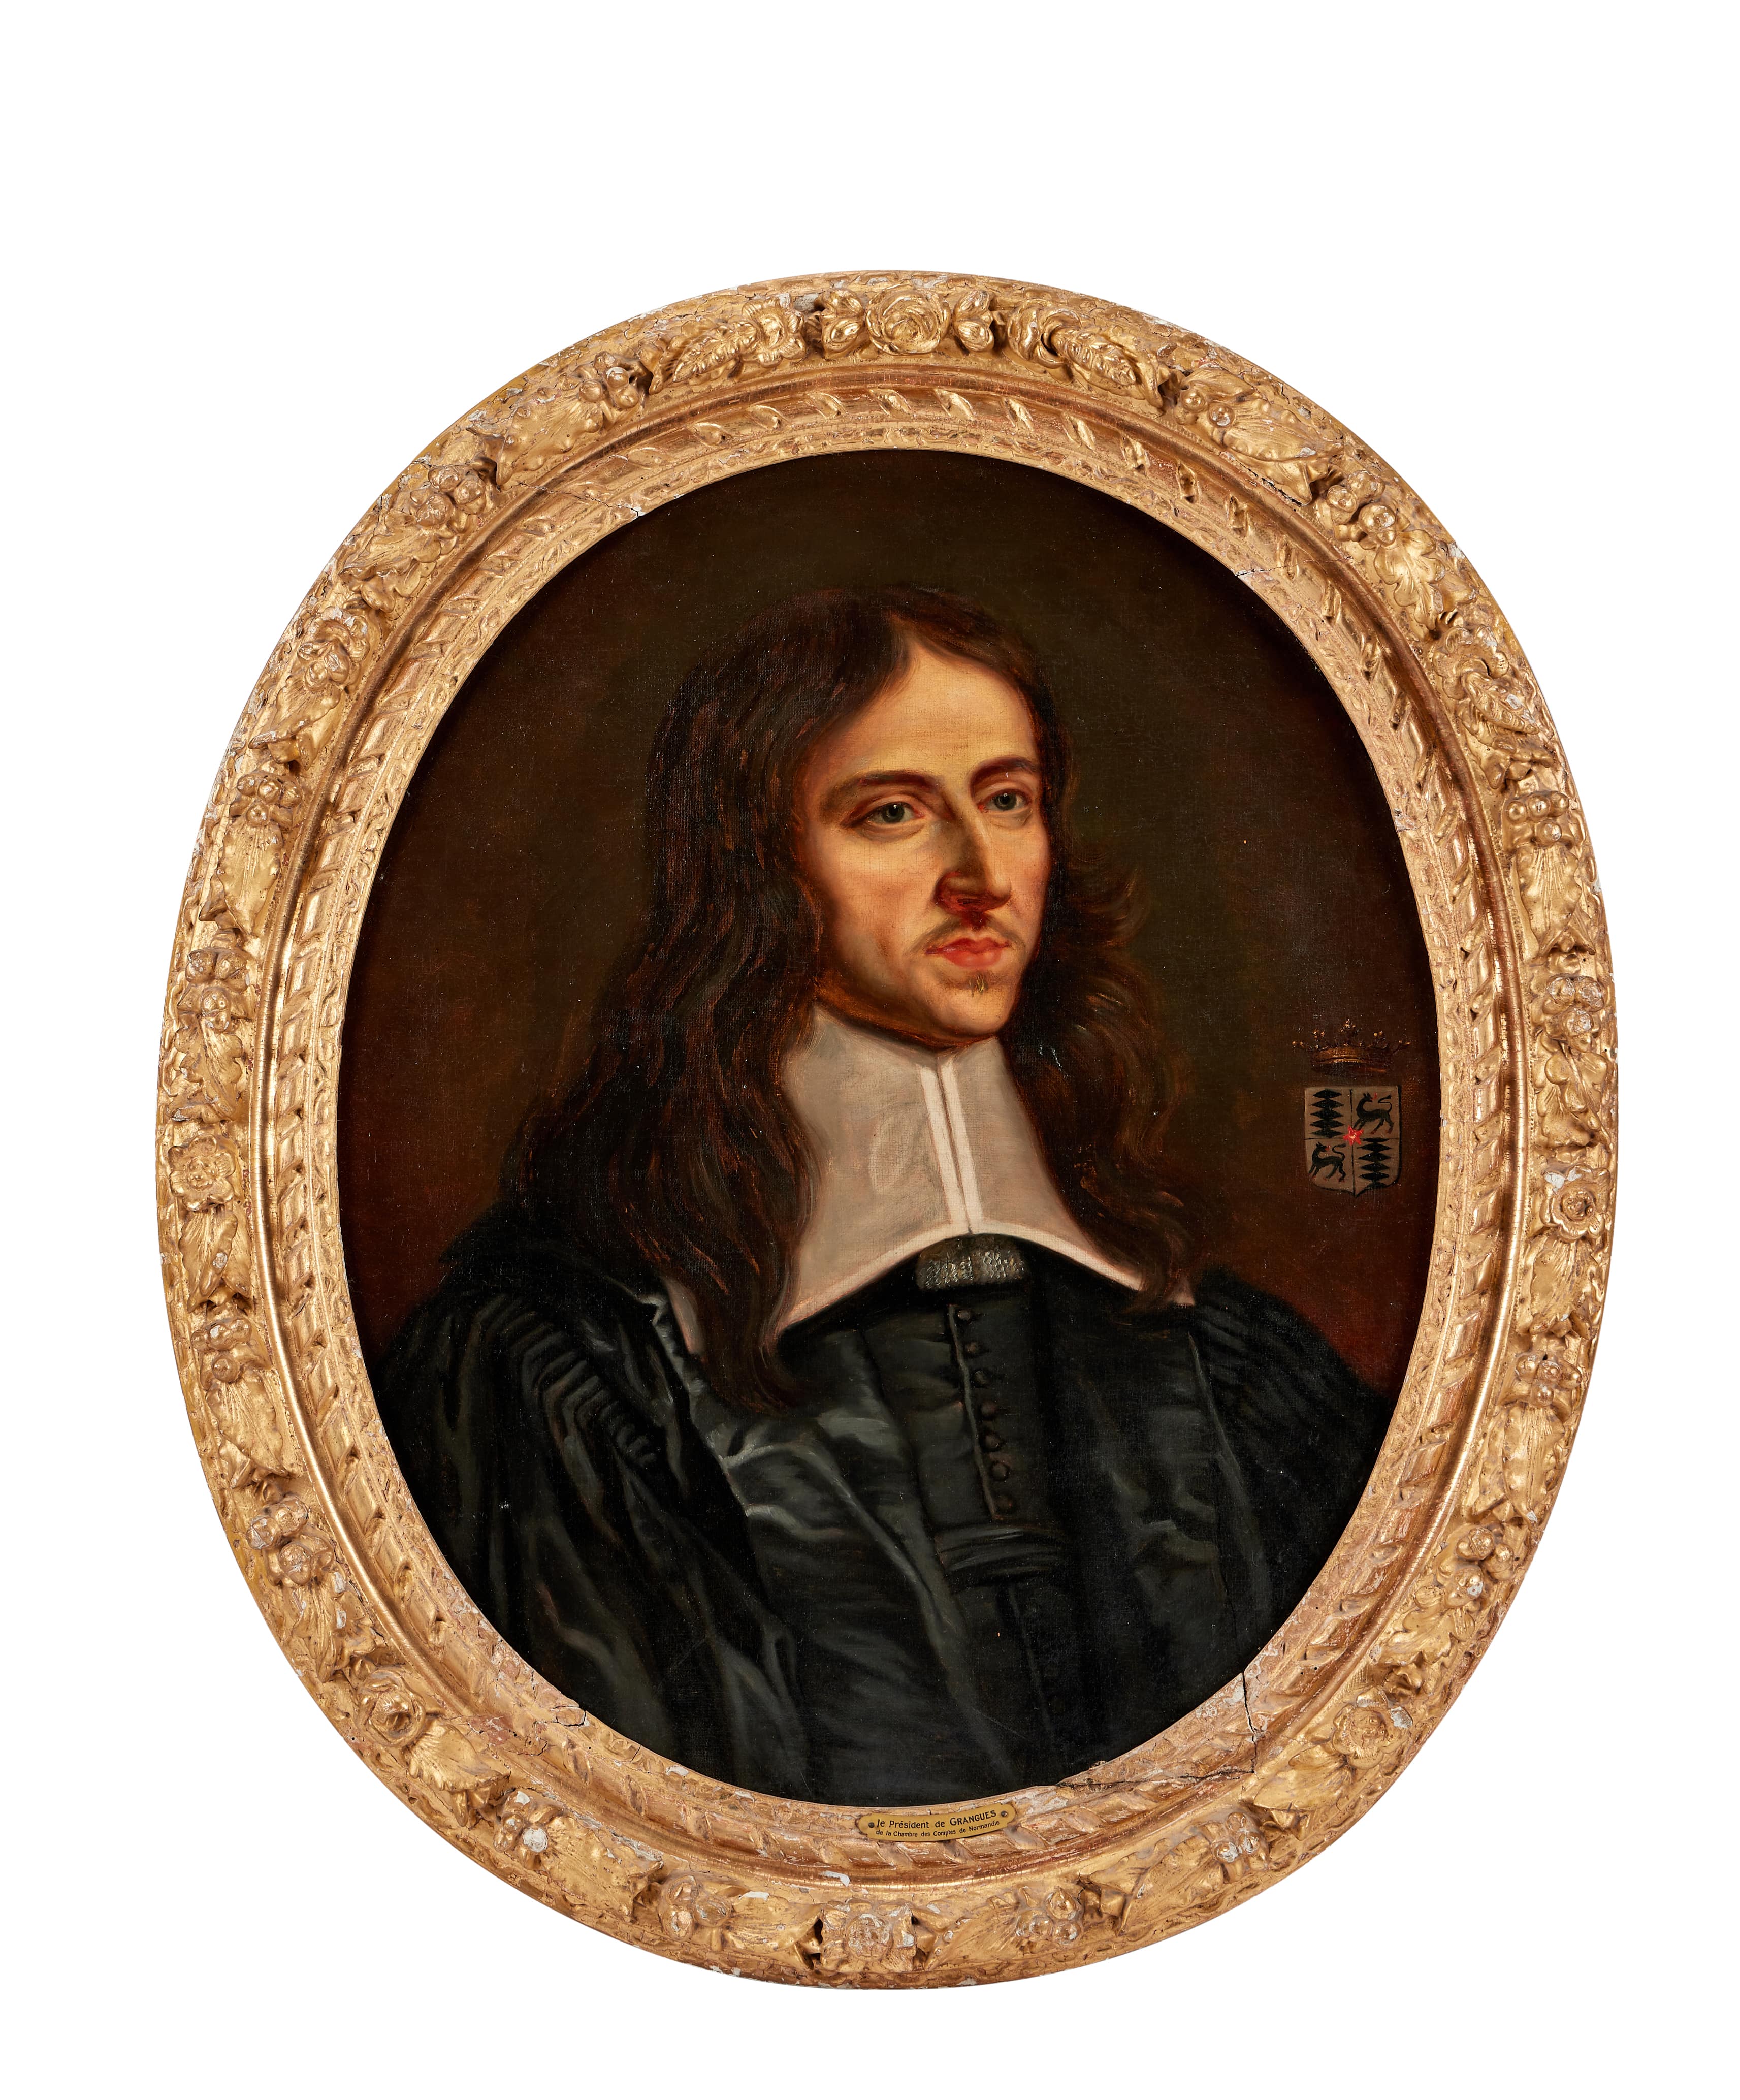 19th century French School, An oval portrait of a man in 17th century dress